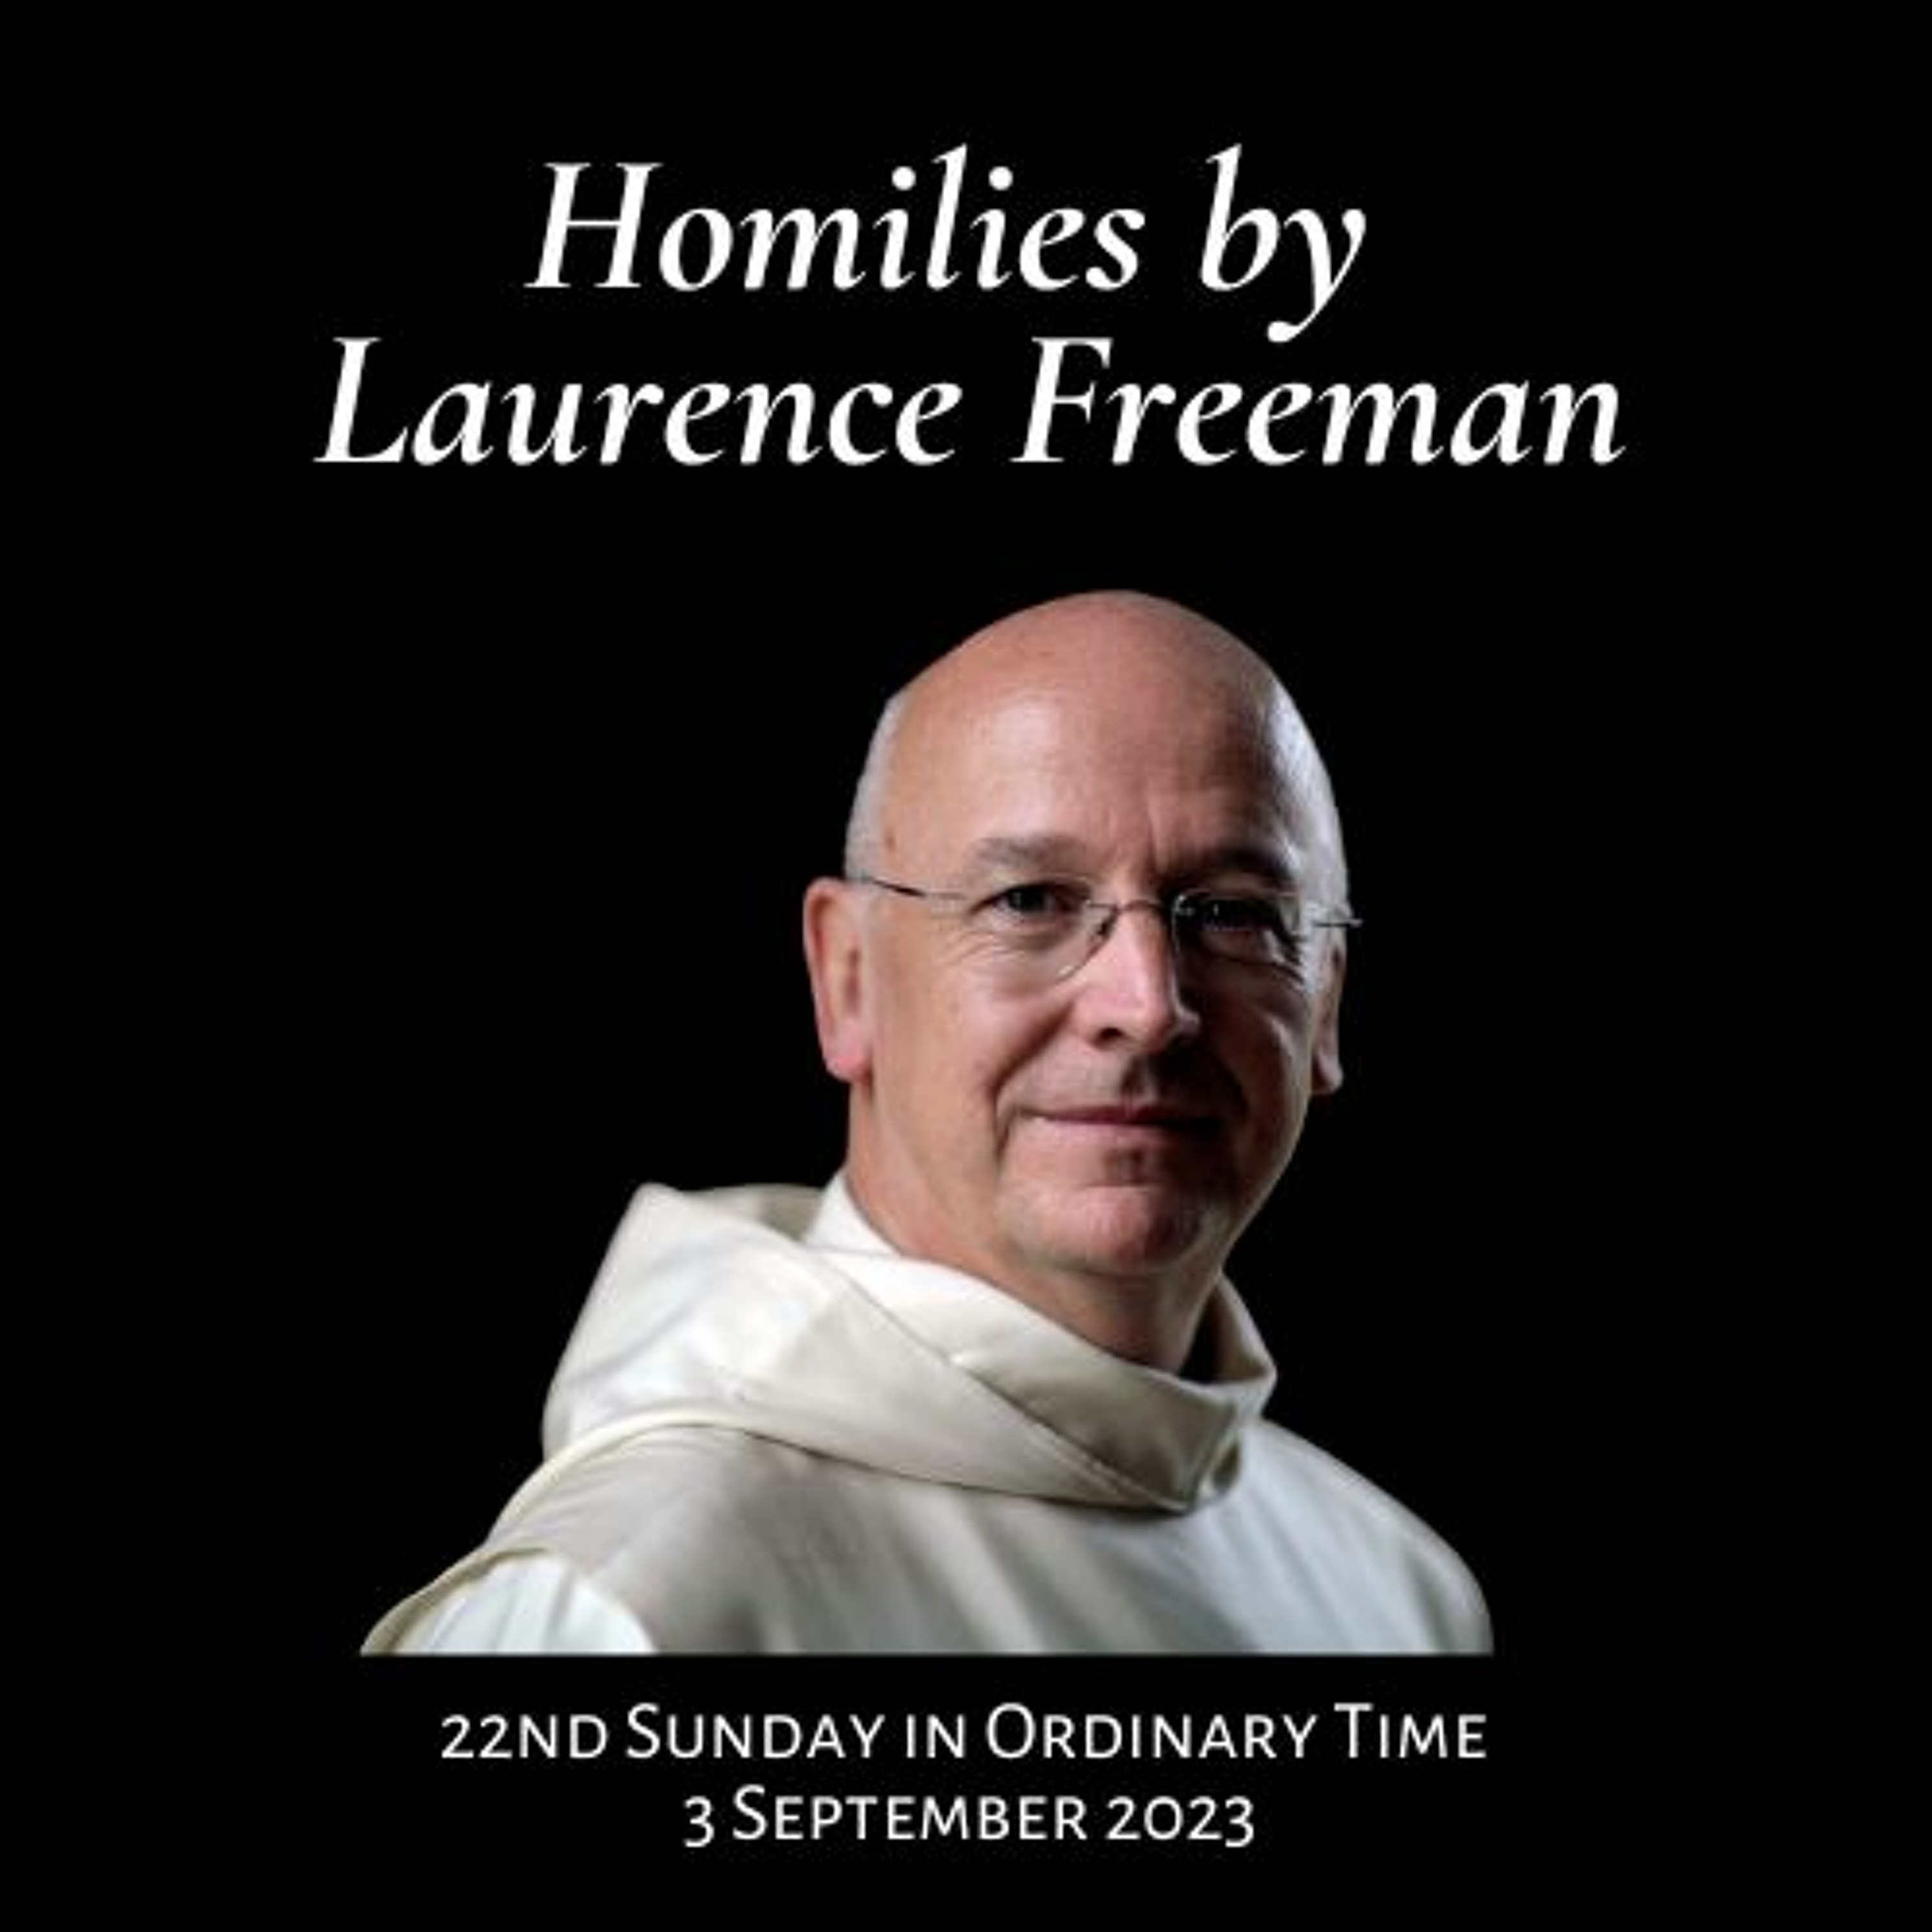 Homily with Laurence Freeman - 22nd Sunday in Ordinary Time